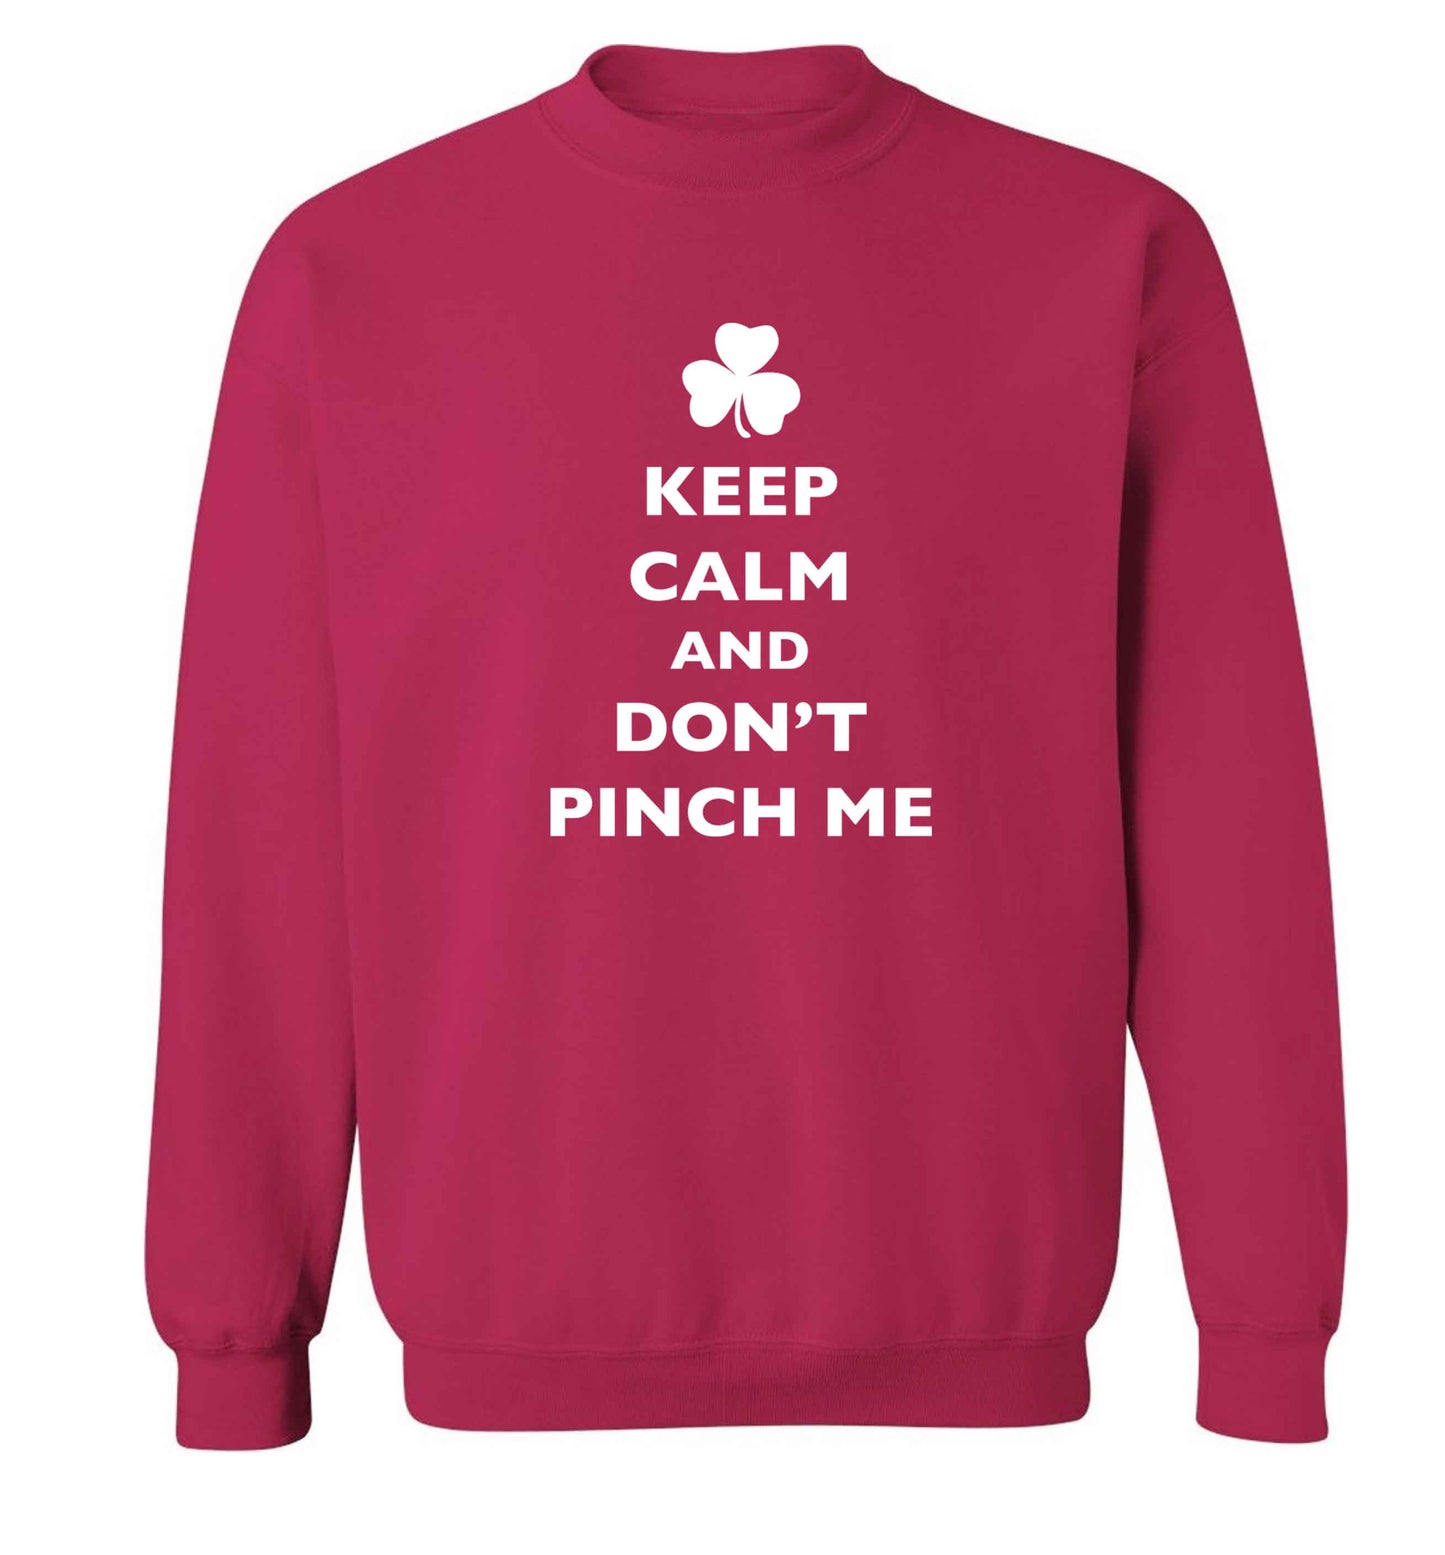 Keep calm and don't pinch me adult's unisex pink sweater 2XL